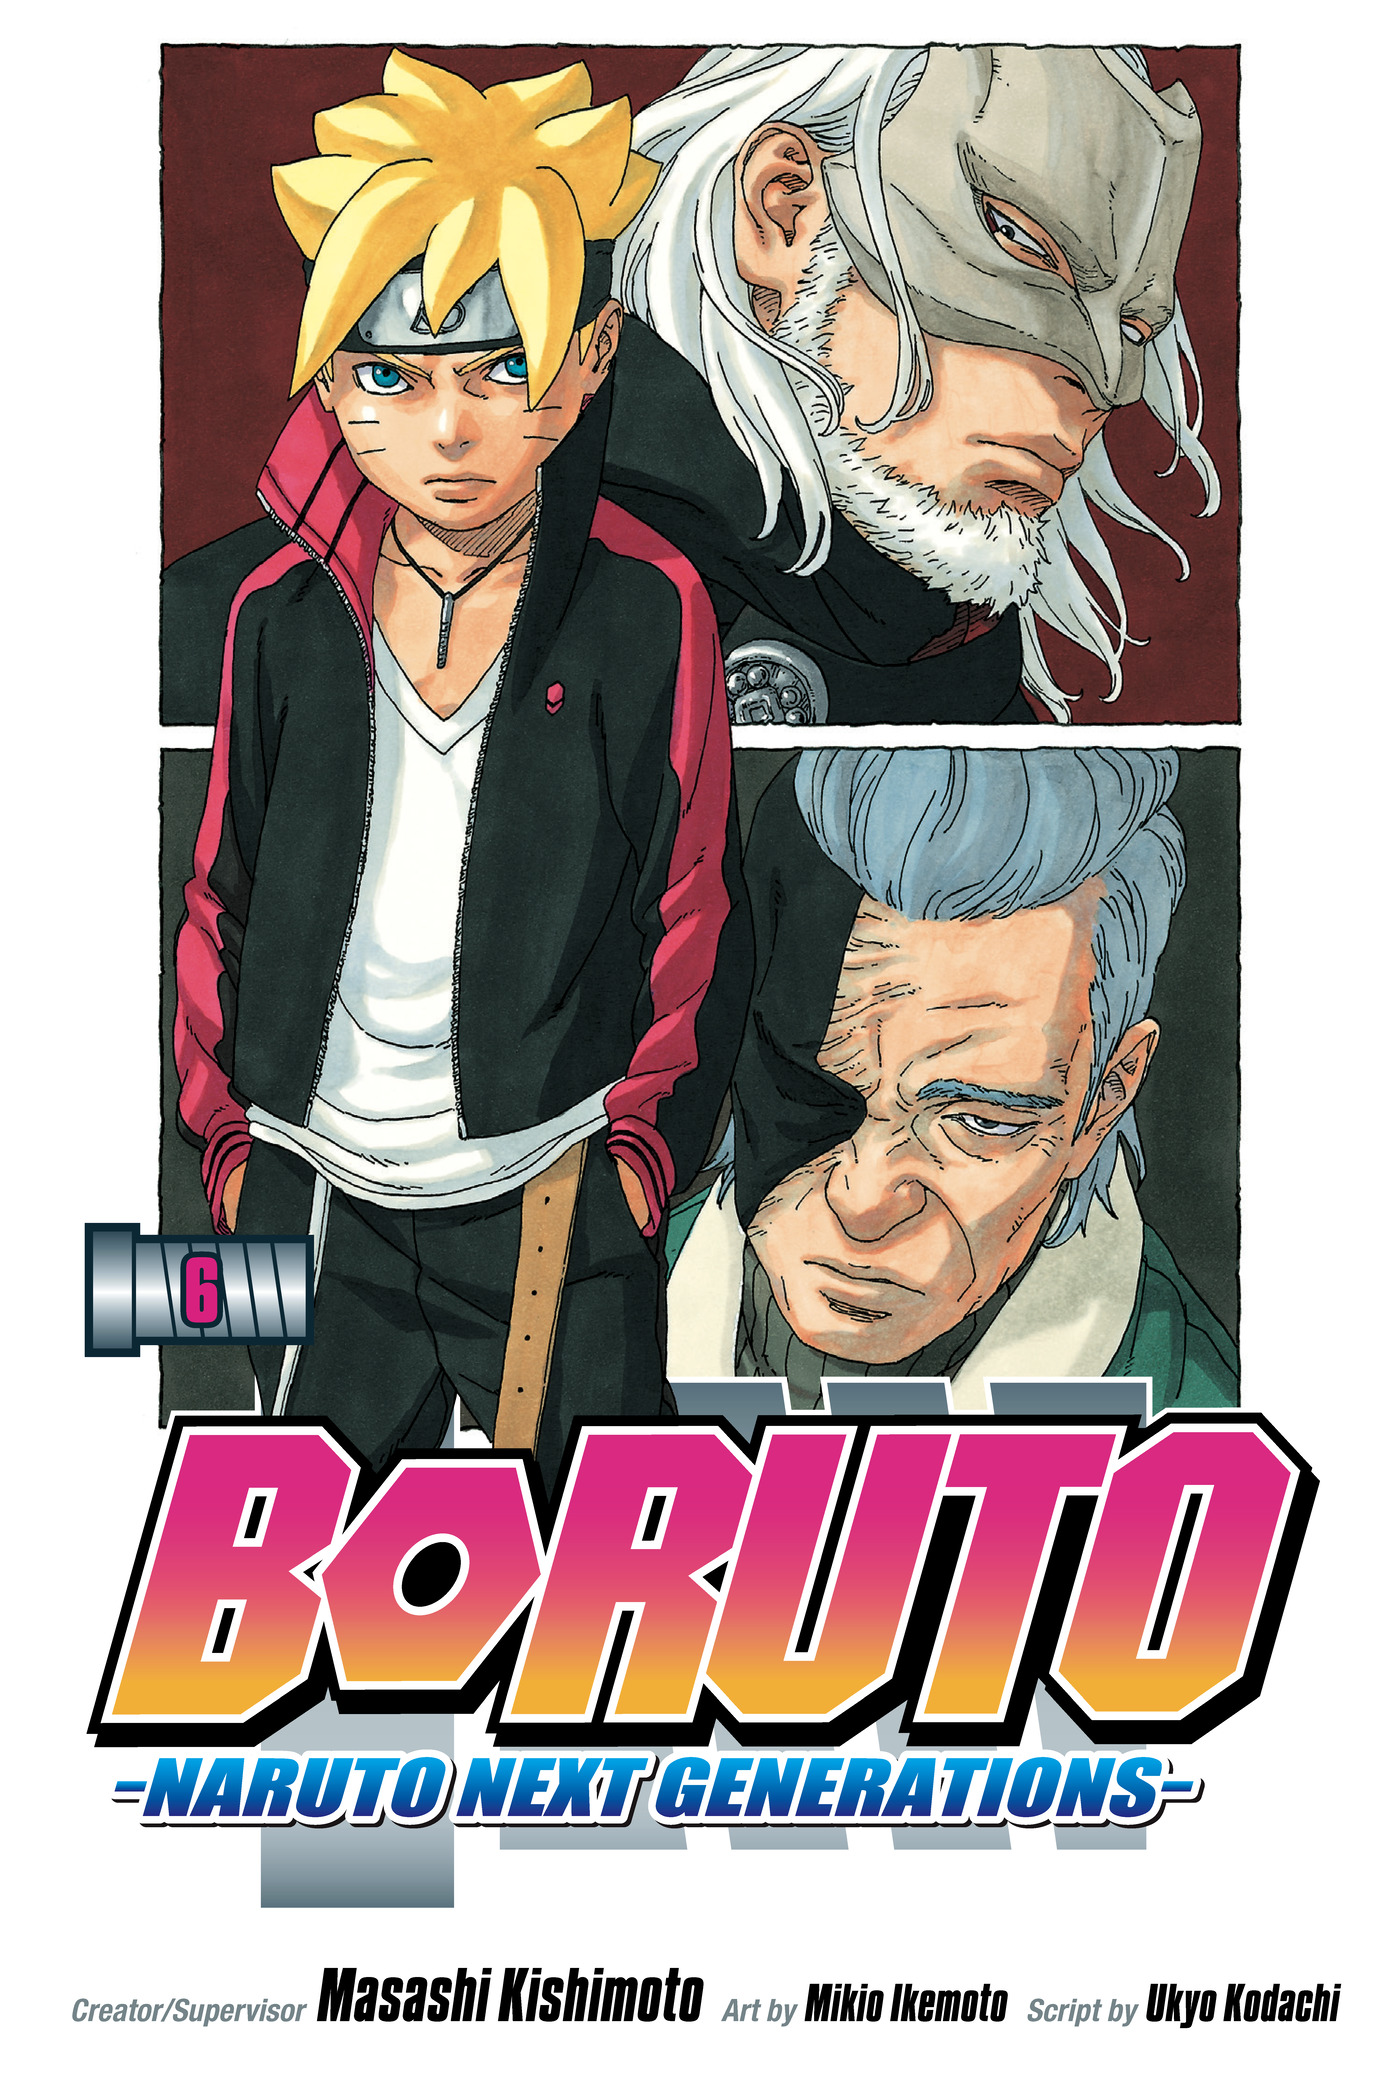 This is an offer made on the Request: Boruto: Naruto Next